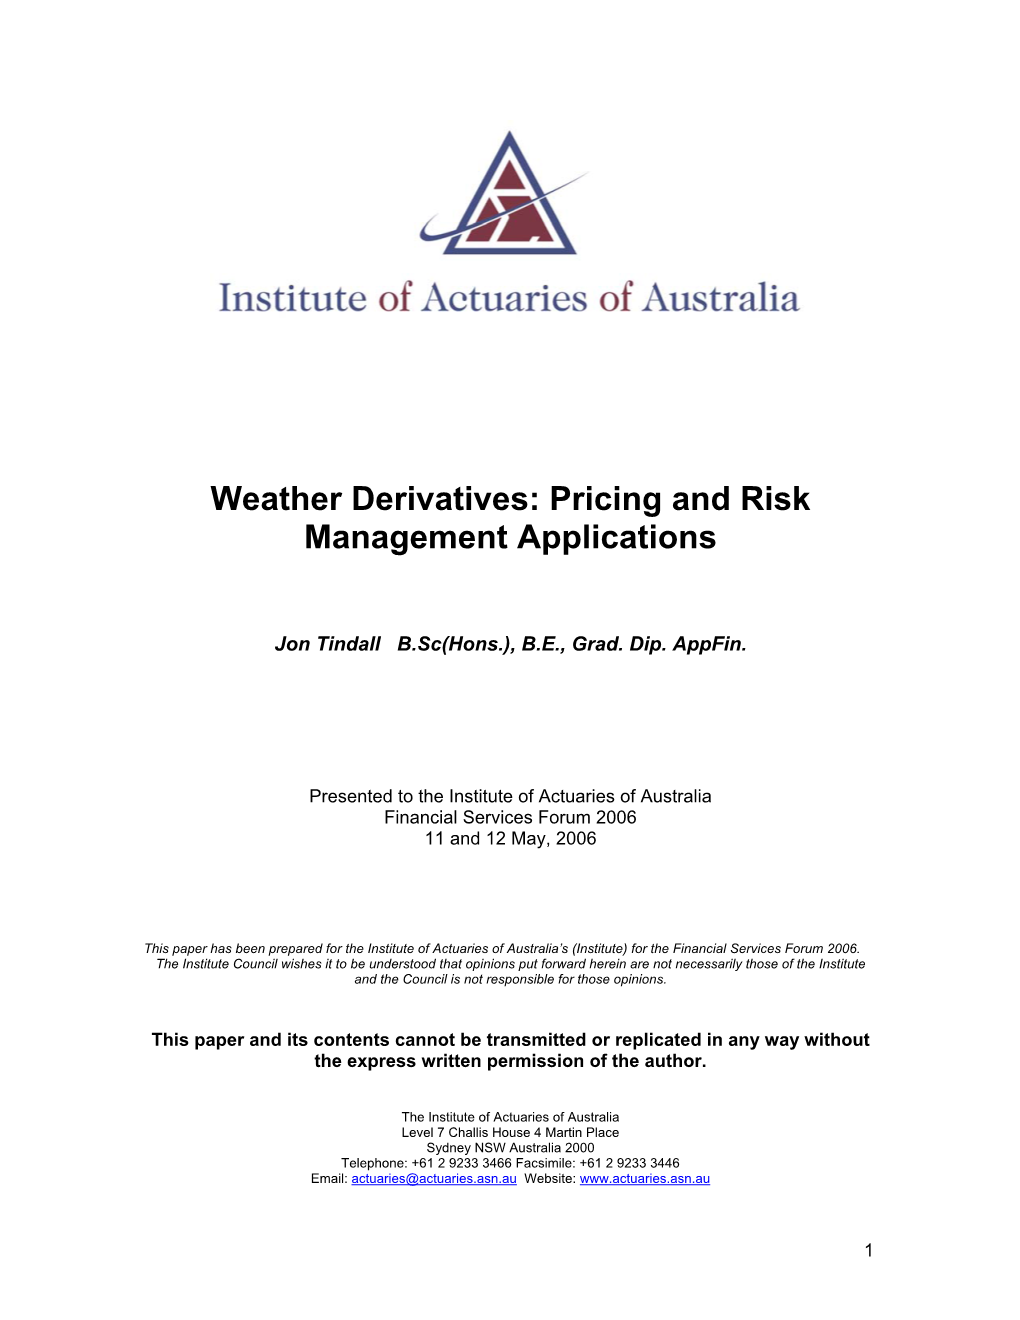 Weather Derivatives: Pricing and Risk Management Applications